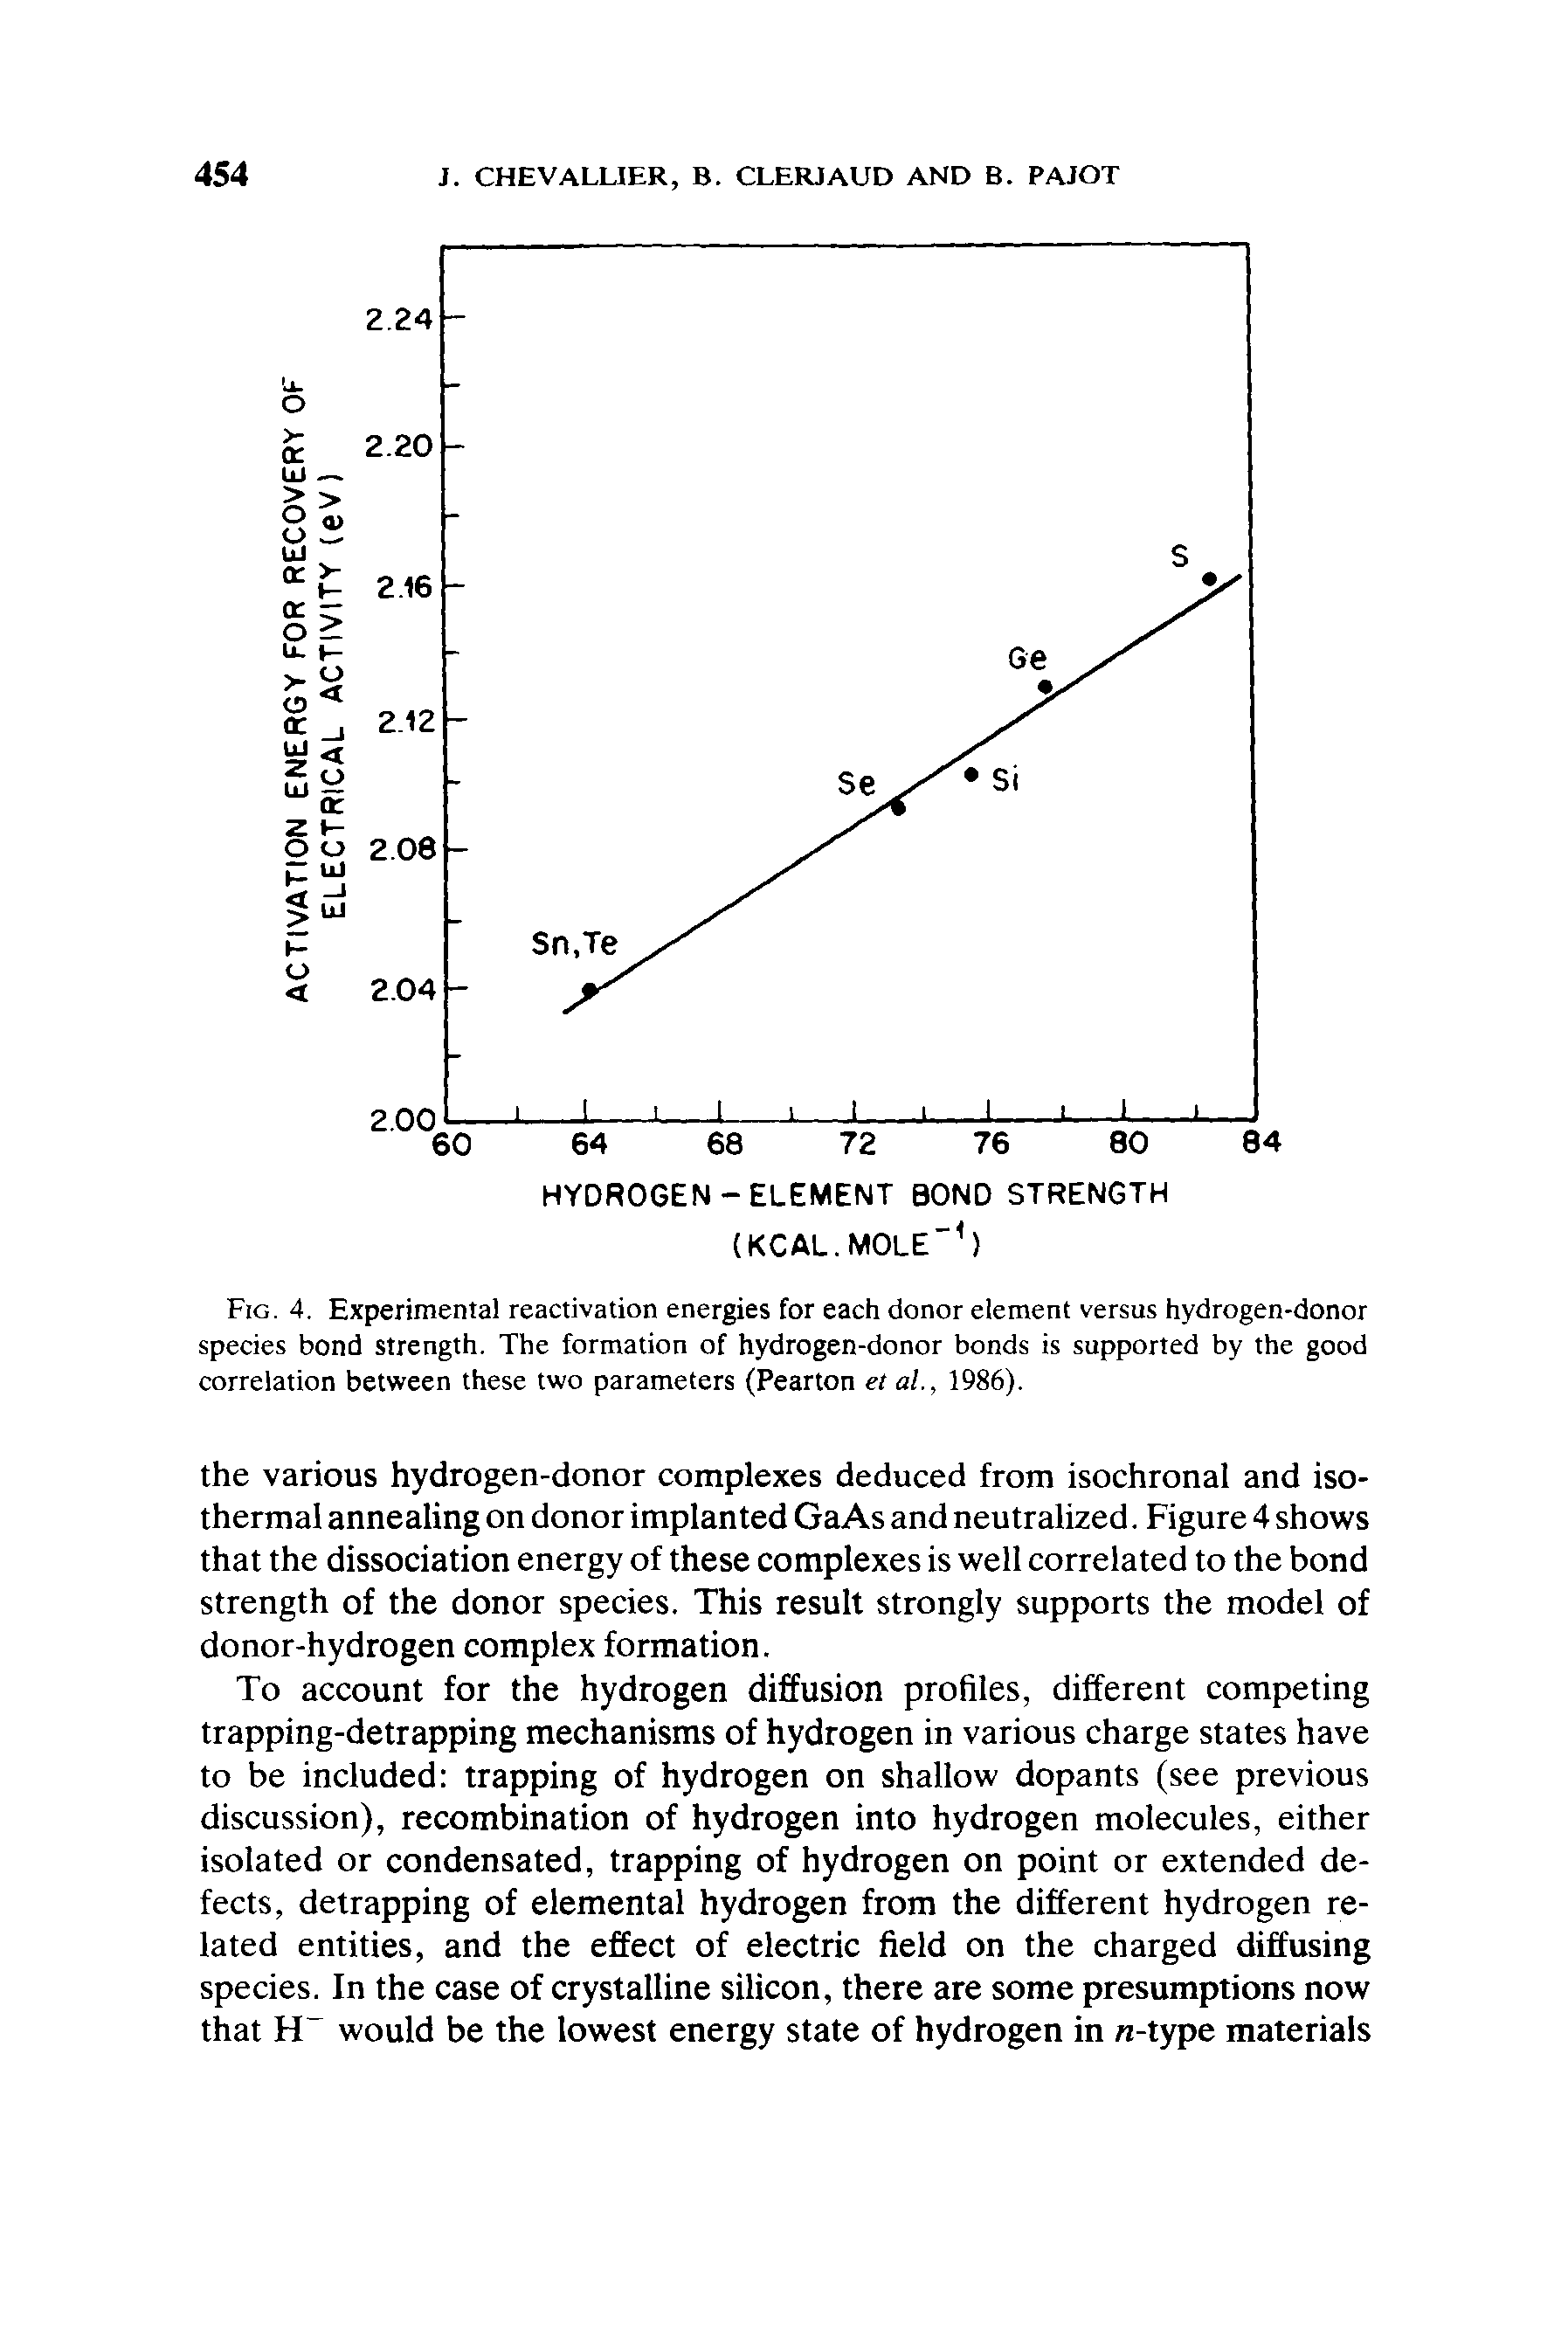 Fig. 4. Experimental reactivation energies for each donor element versus hydrogen-donor species bond strength. The formation of hydrogen-donor bonds is supported by the good correlation between these two parameters (Pearton et al., 1986).